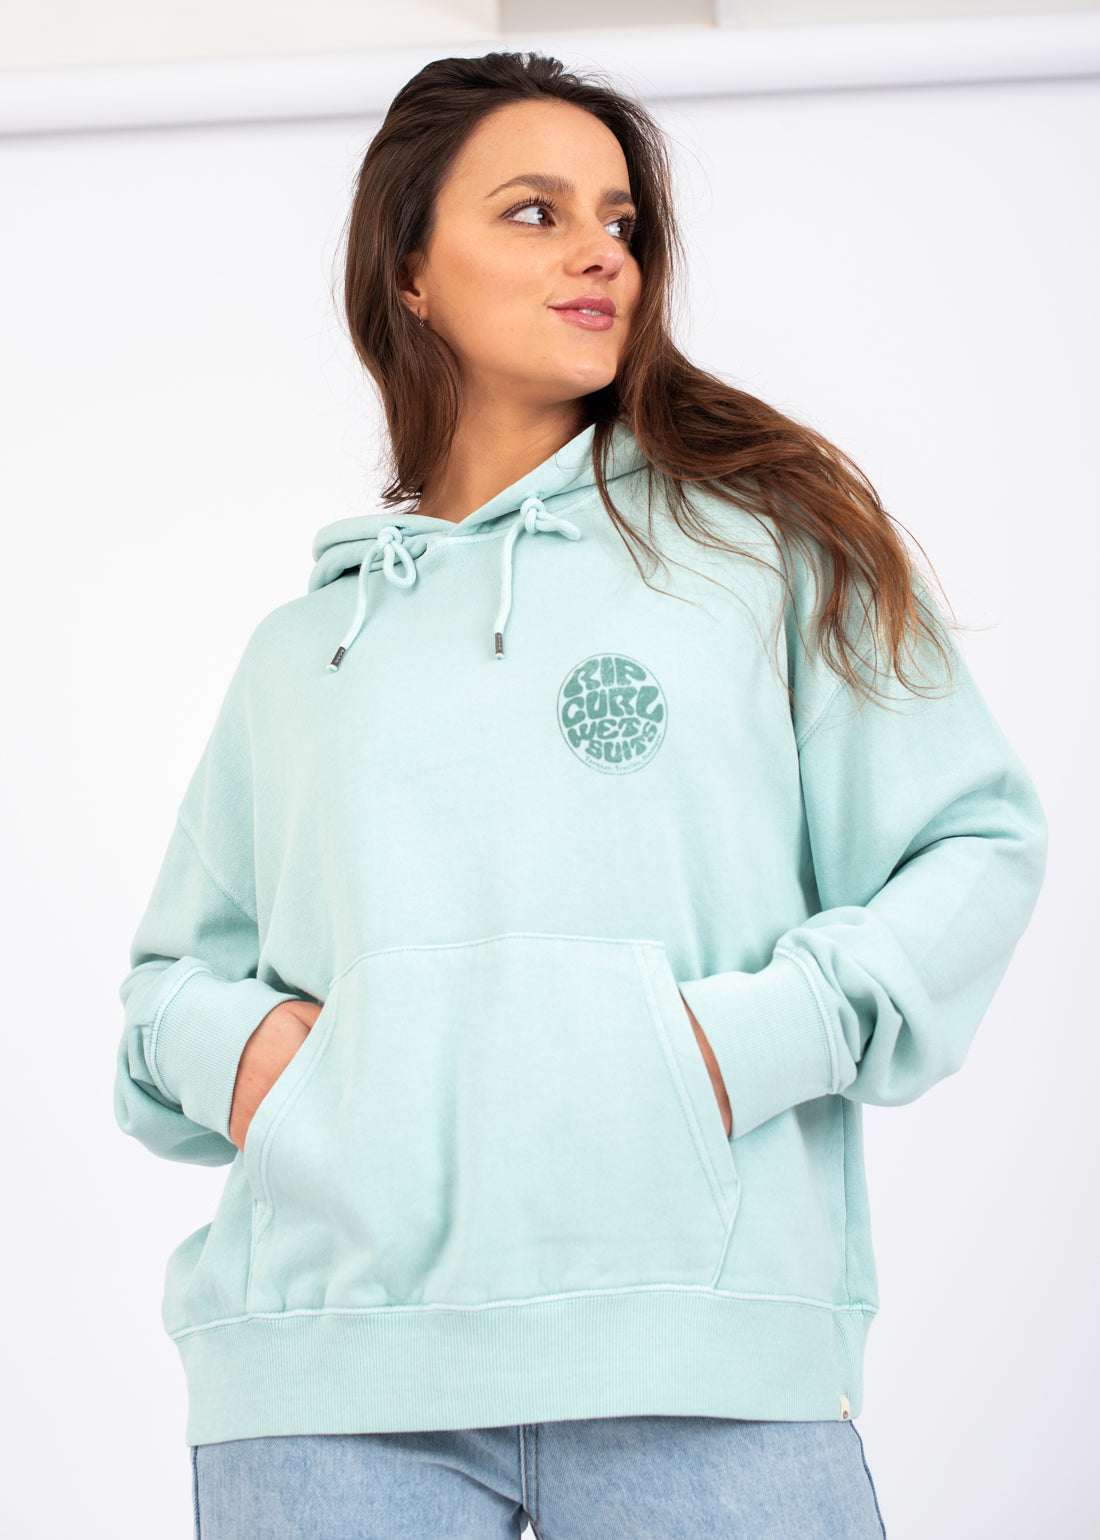 Sweaters & Hoodies – The Beach Boutique | A Shop For Ocean Lovers